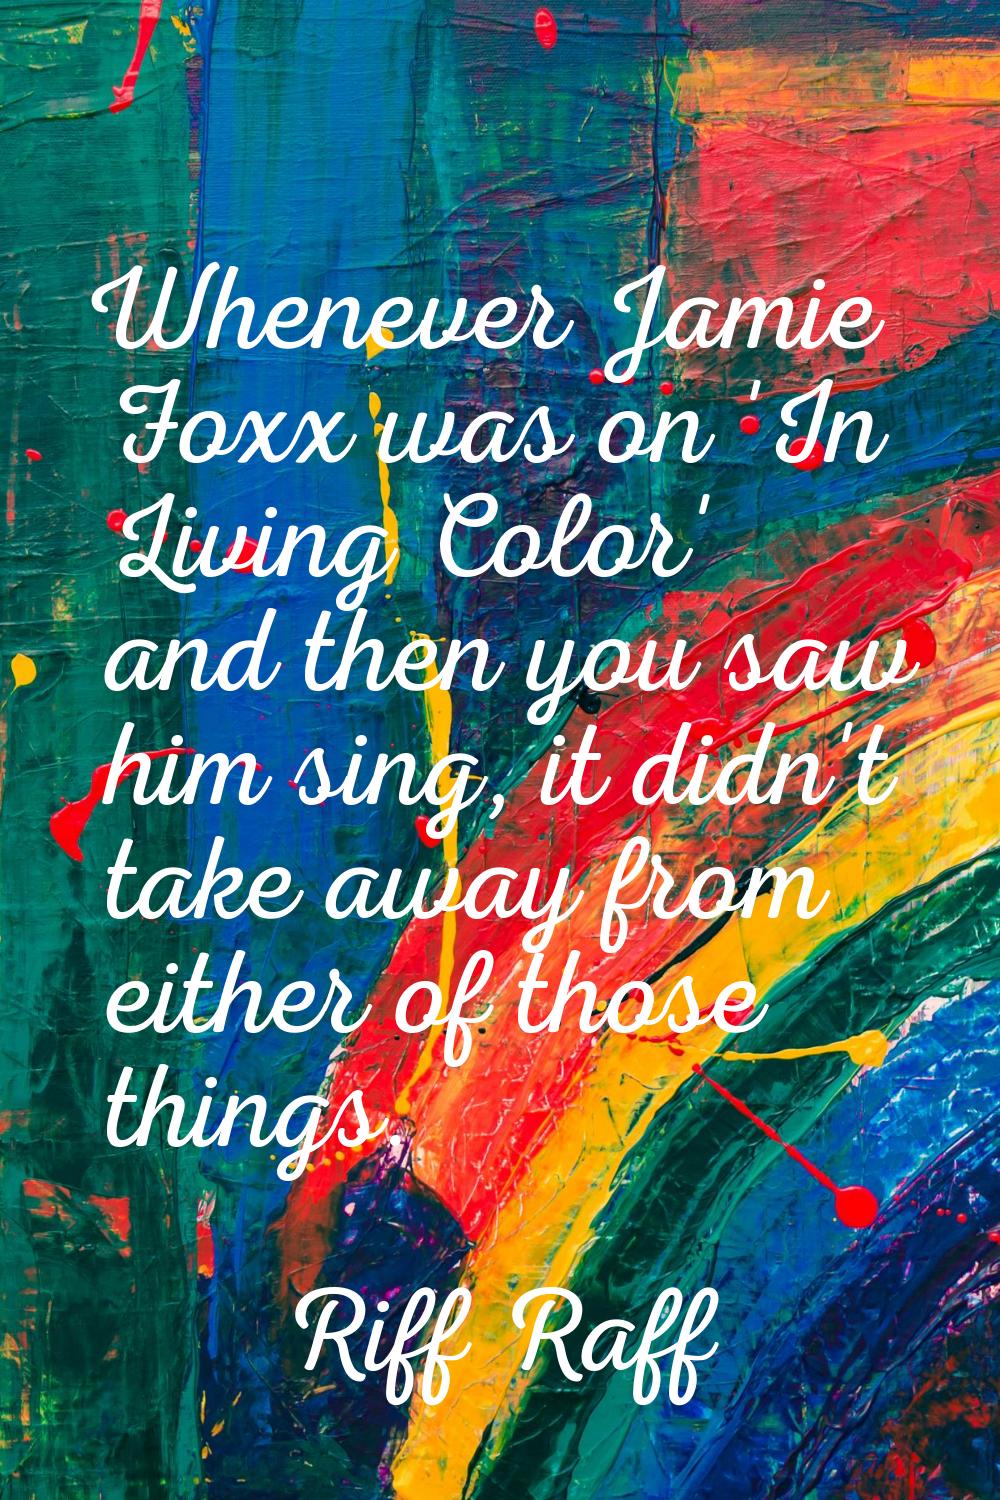 Whenever Jamie Foxx was on 'In Living Color' and then you saw him sing, it didn't take away from ei